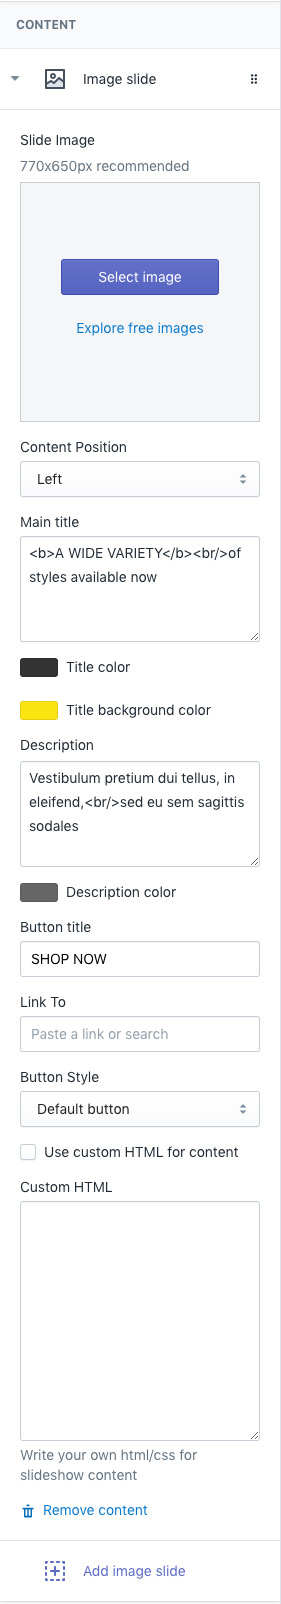 Section Content Setting - Slideshow with banner